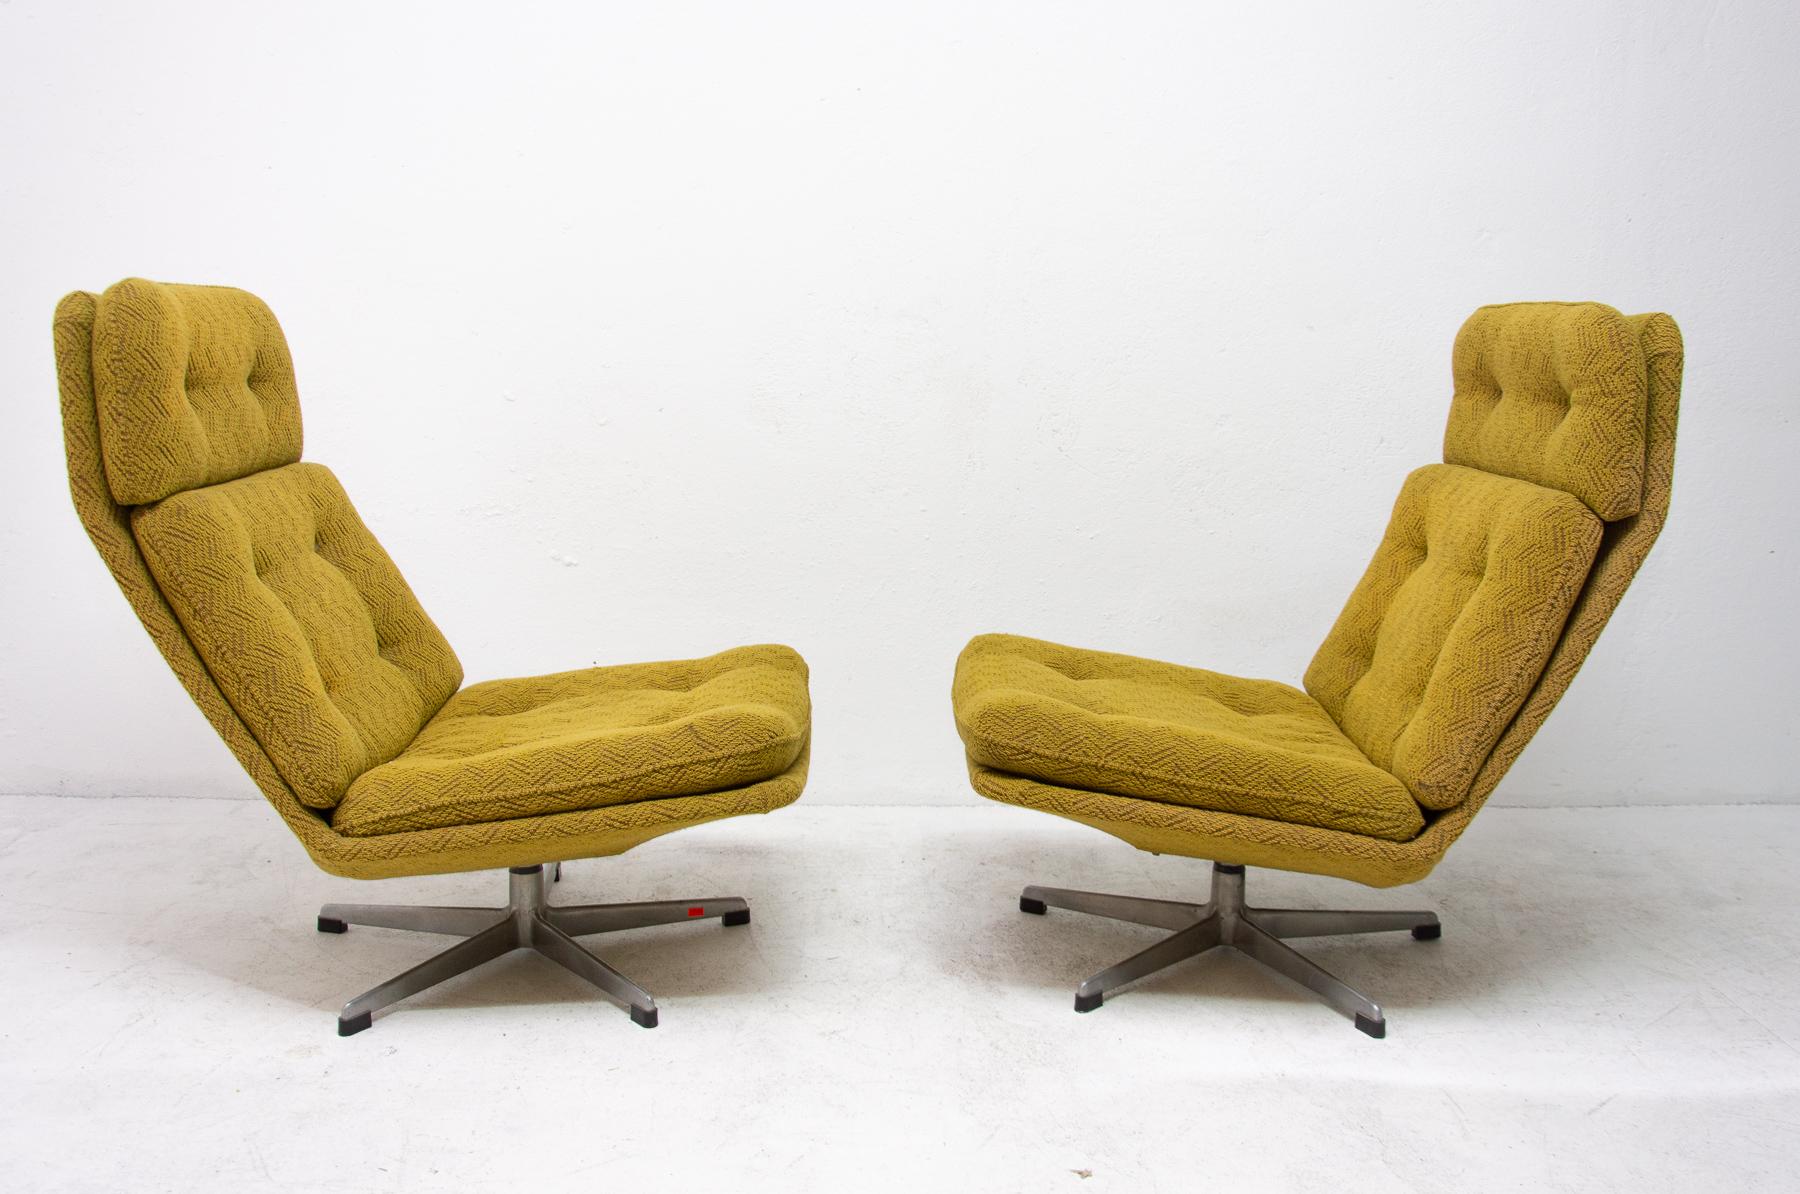 Czech Pair of Swivel Chairs Designed by Gerald Neusser for Úp Závody, 1970s